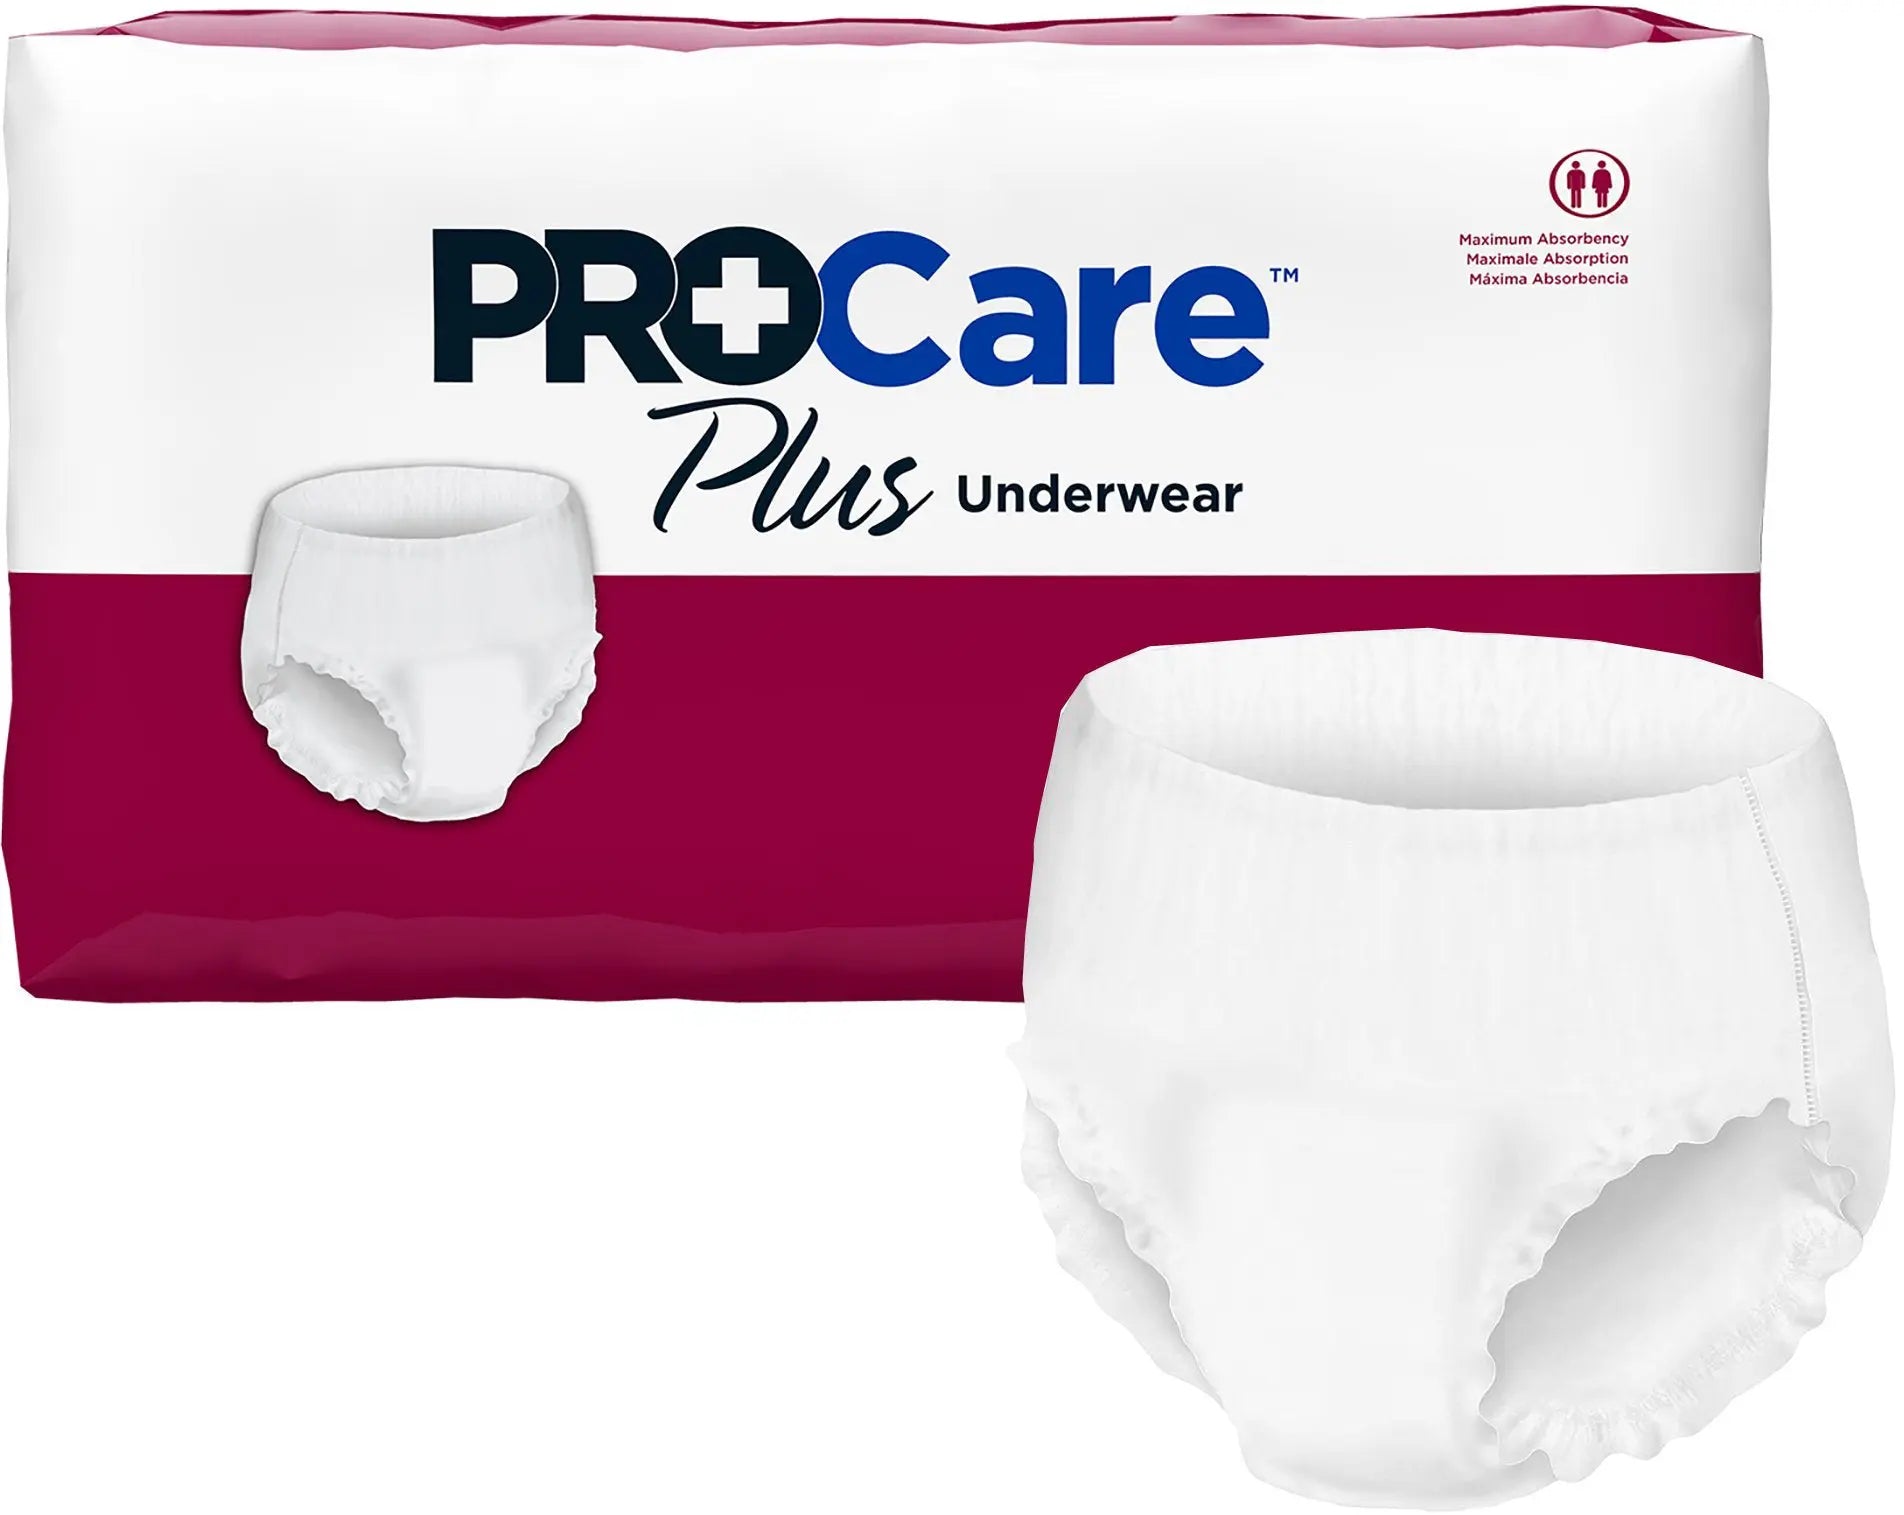 PROCare Bariatric Adult Briefs - Personally Delivered